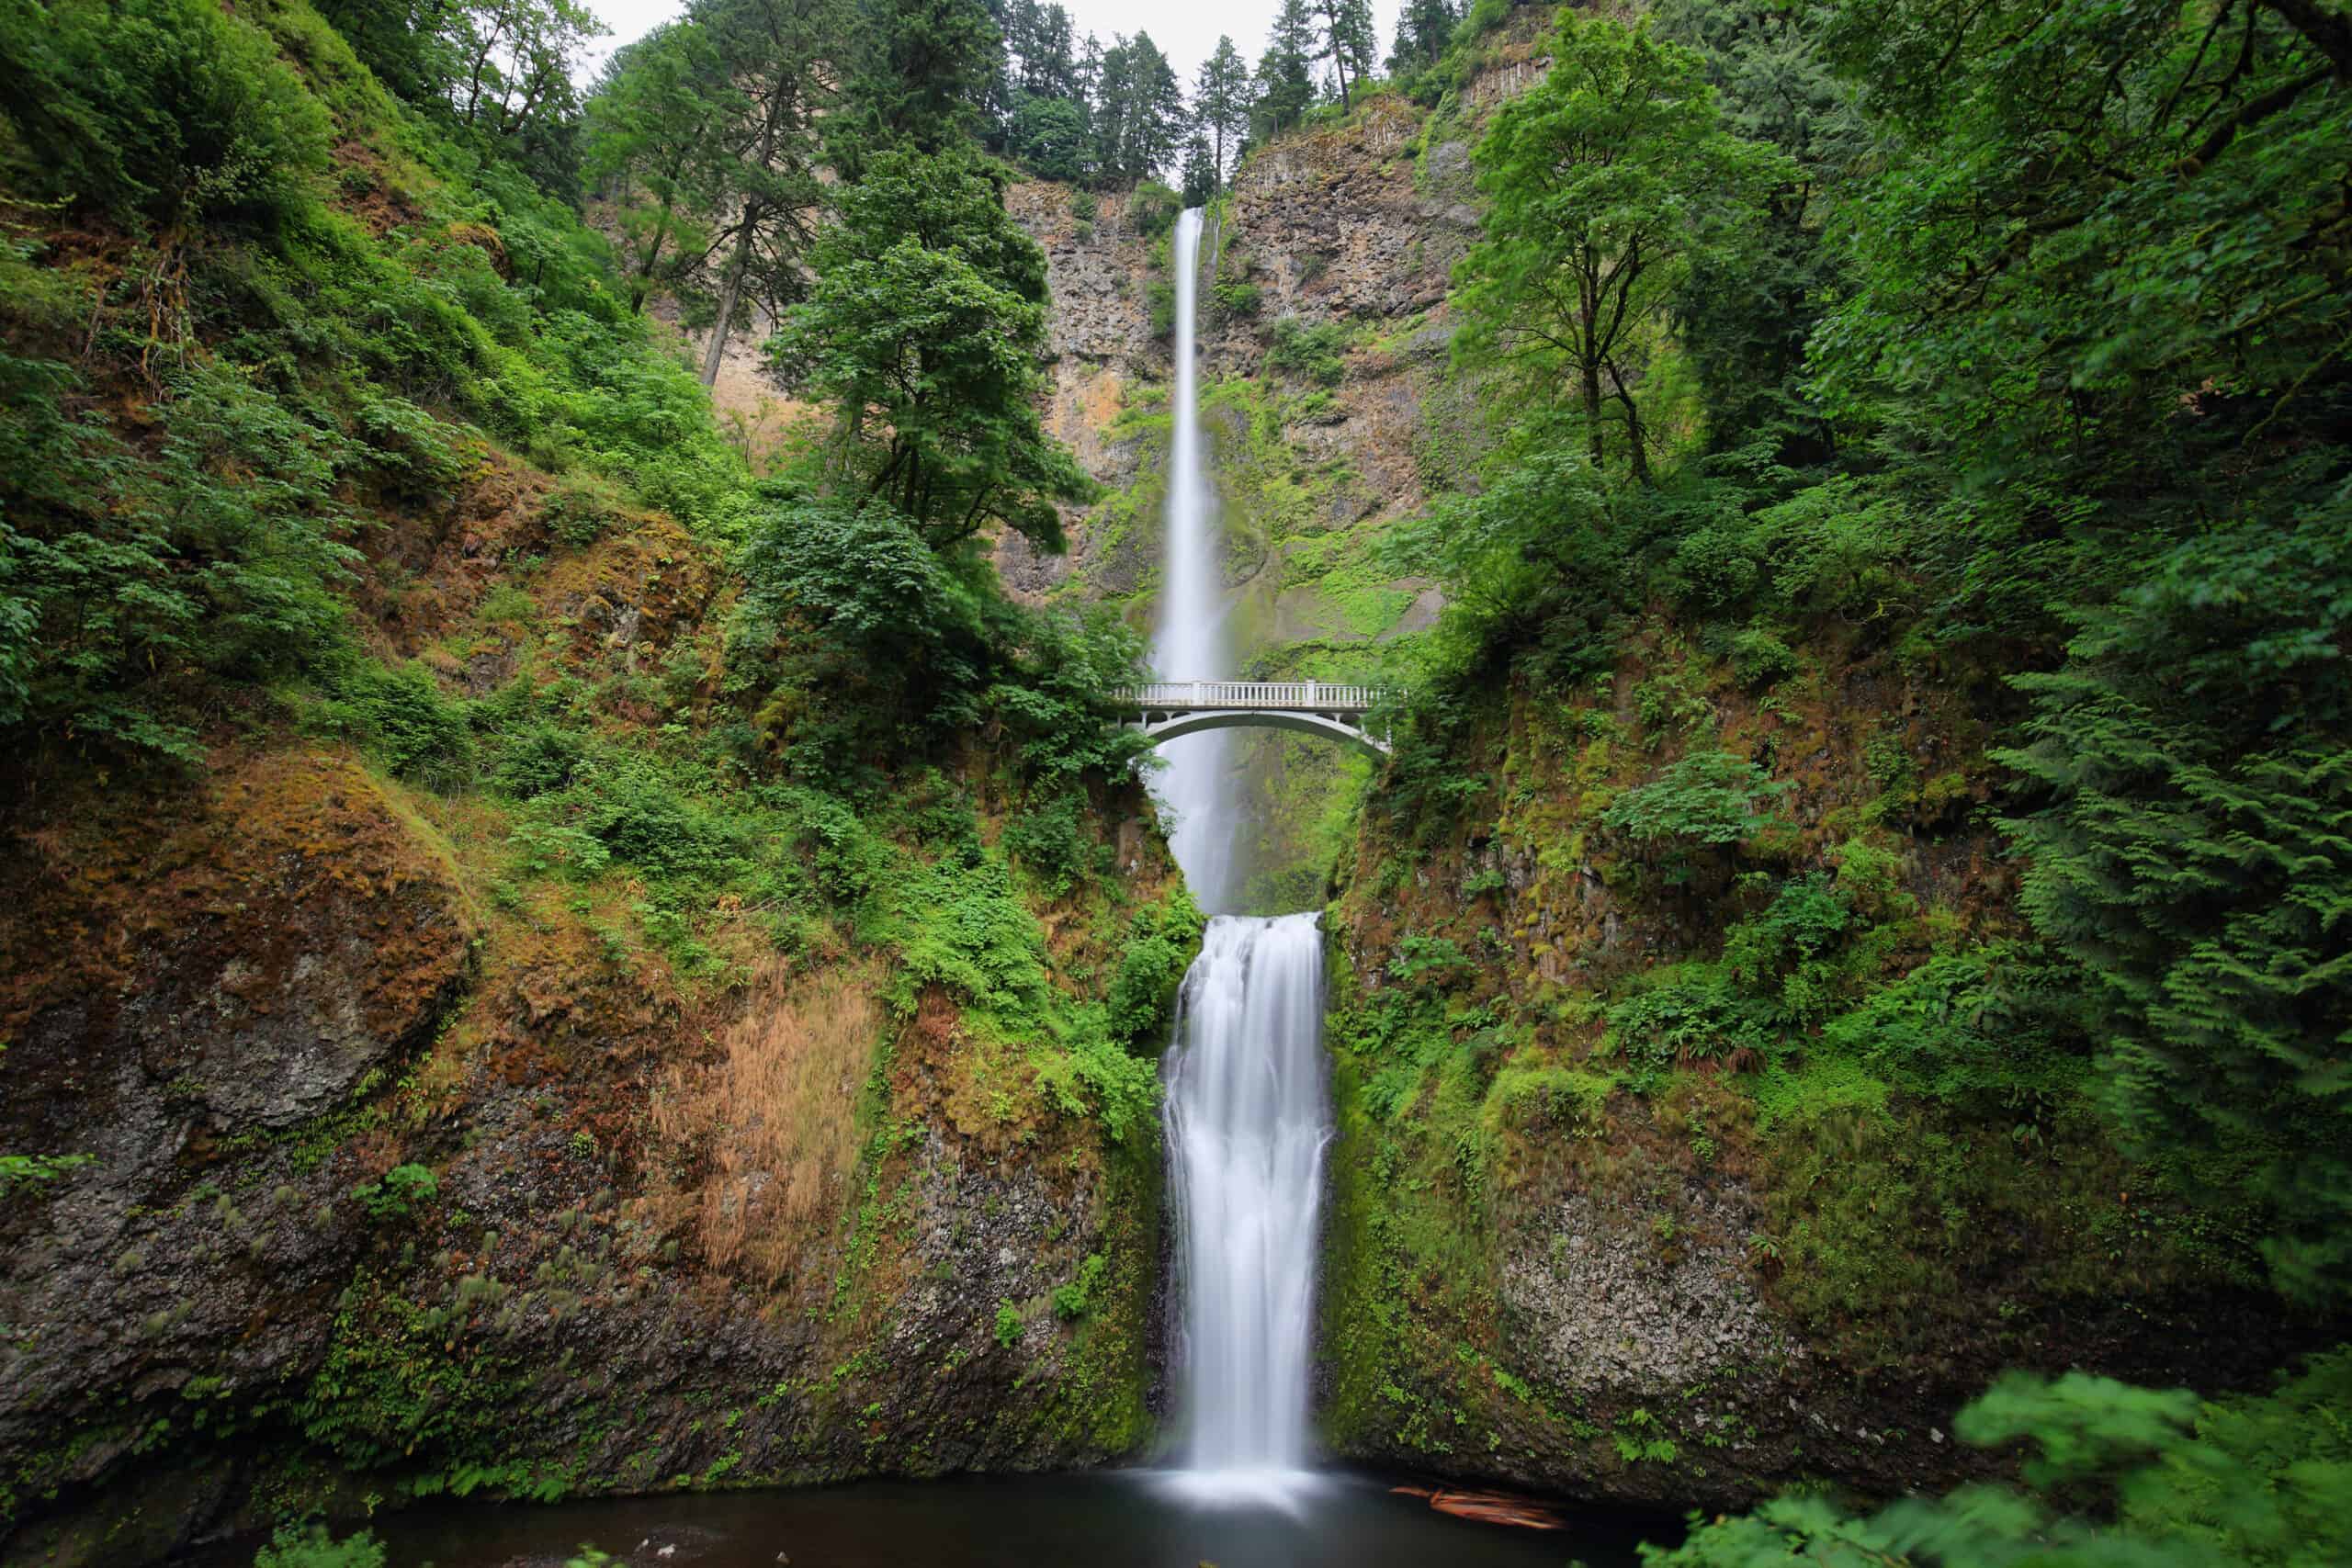 <p>Multnomah Falls is just outside of Portland, along the highway that runs along the Oregon-Washington border that follows the Columbia River. The waterfall has two tiers of basalt cliffs and is the tallest waterfall in Oregon at 620 feet. The roadside attraction is open year-round, with hiking trails and a scenic viewpoint. In the winter, the falls sometimes freeze, making for great photos. The Multnomah tribe has an origin story for the falls that tells the tale of a young woman who jumped off the cliff in a selfless sacrifice to save the village, and after her death, water started falling from the cliffs.</p>